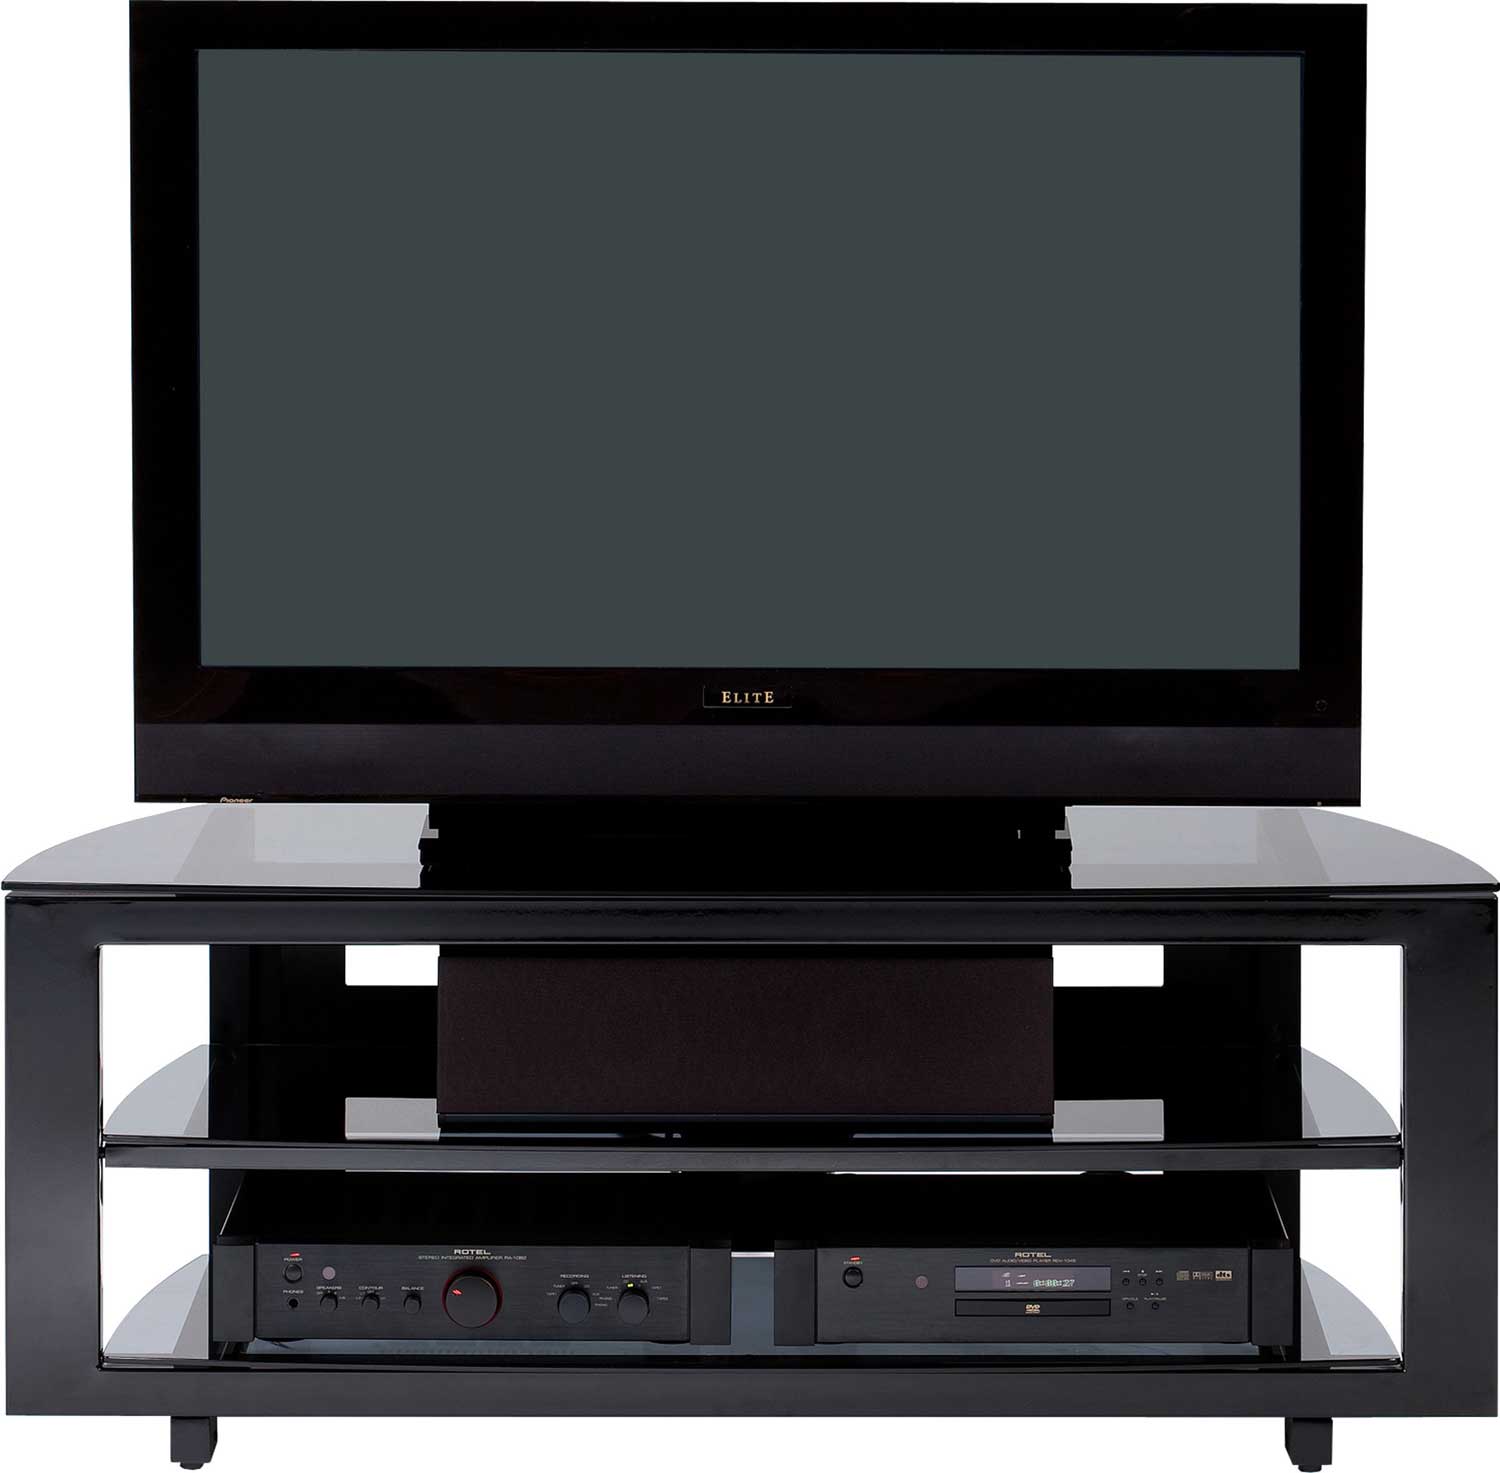 BDI Deploy Max 9644 Black LED and LCD TV Stand